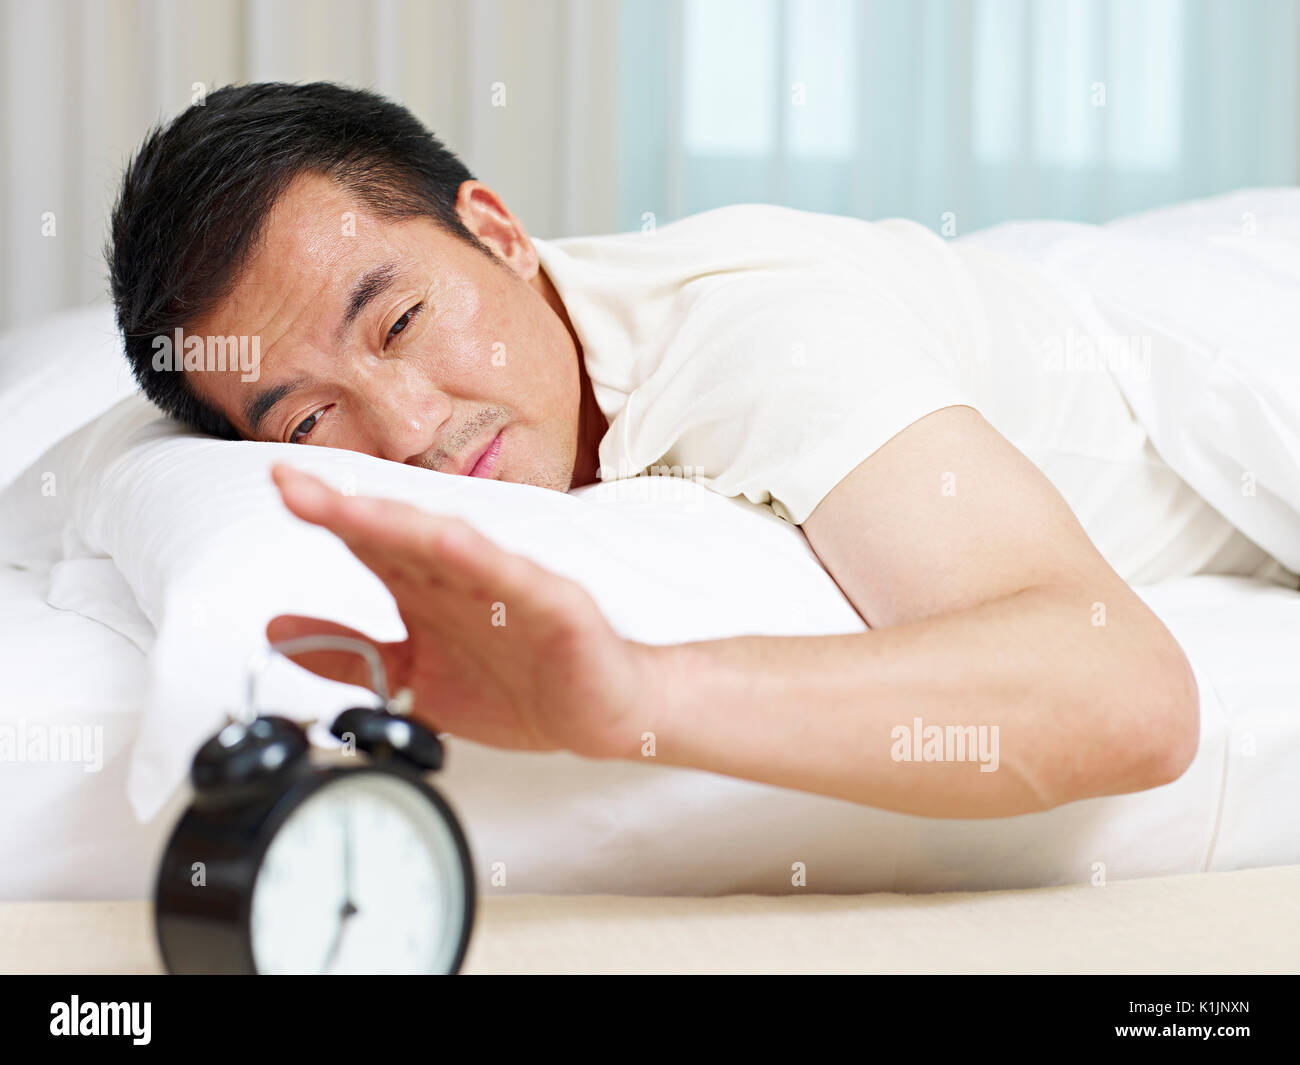 asian man lying in bed trying to stop ringing alarm clock. Stock Photo